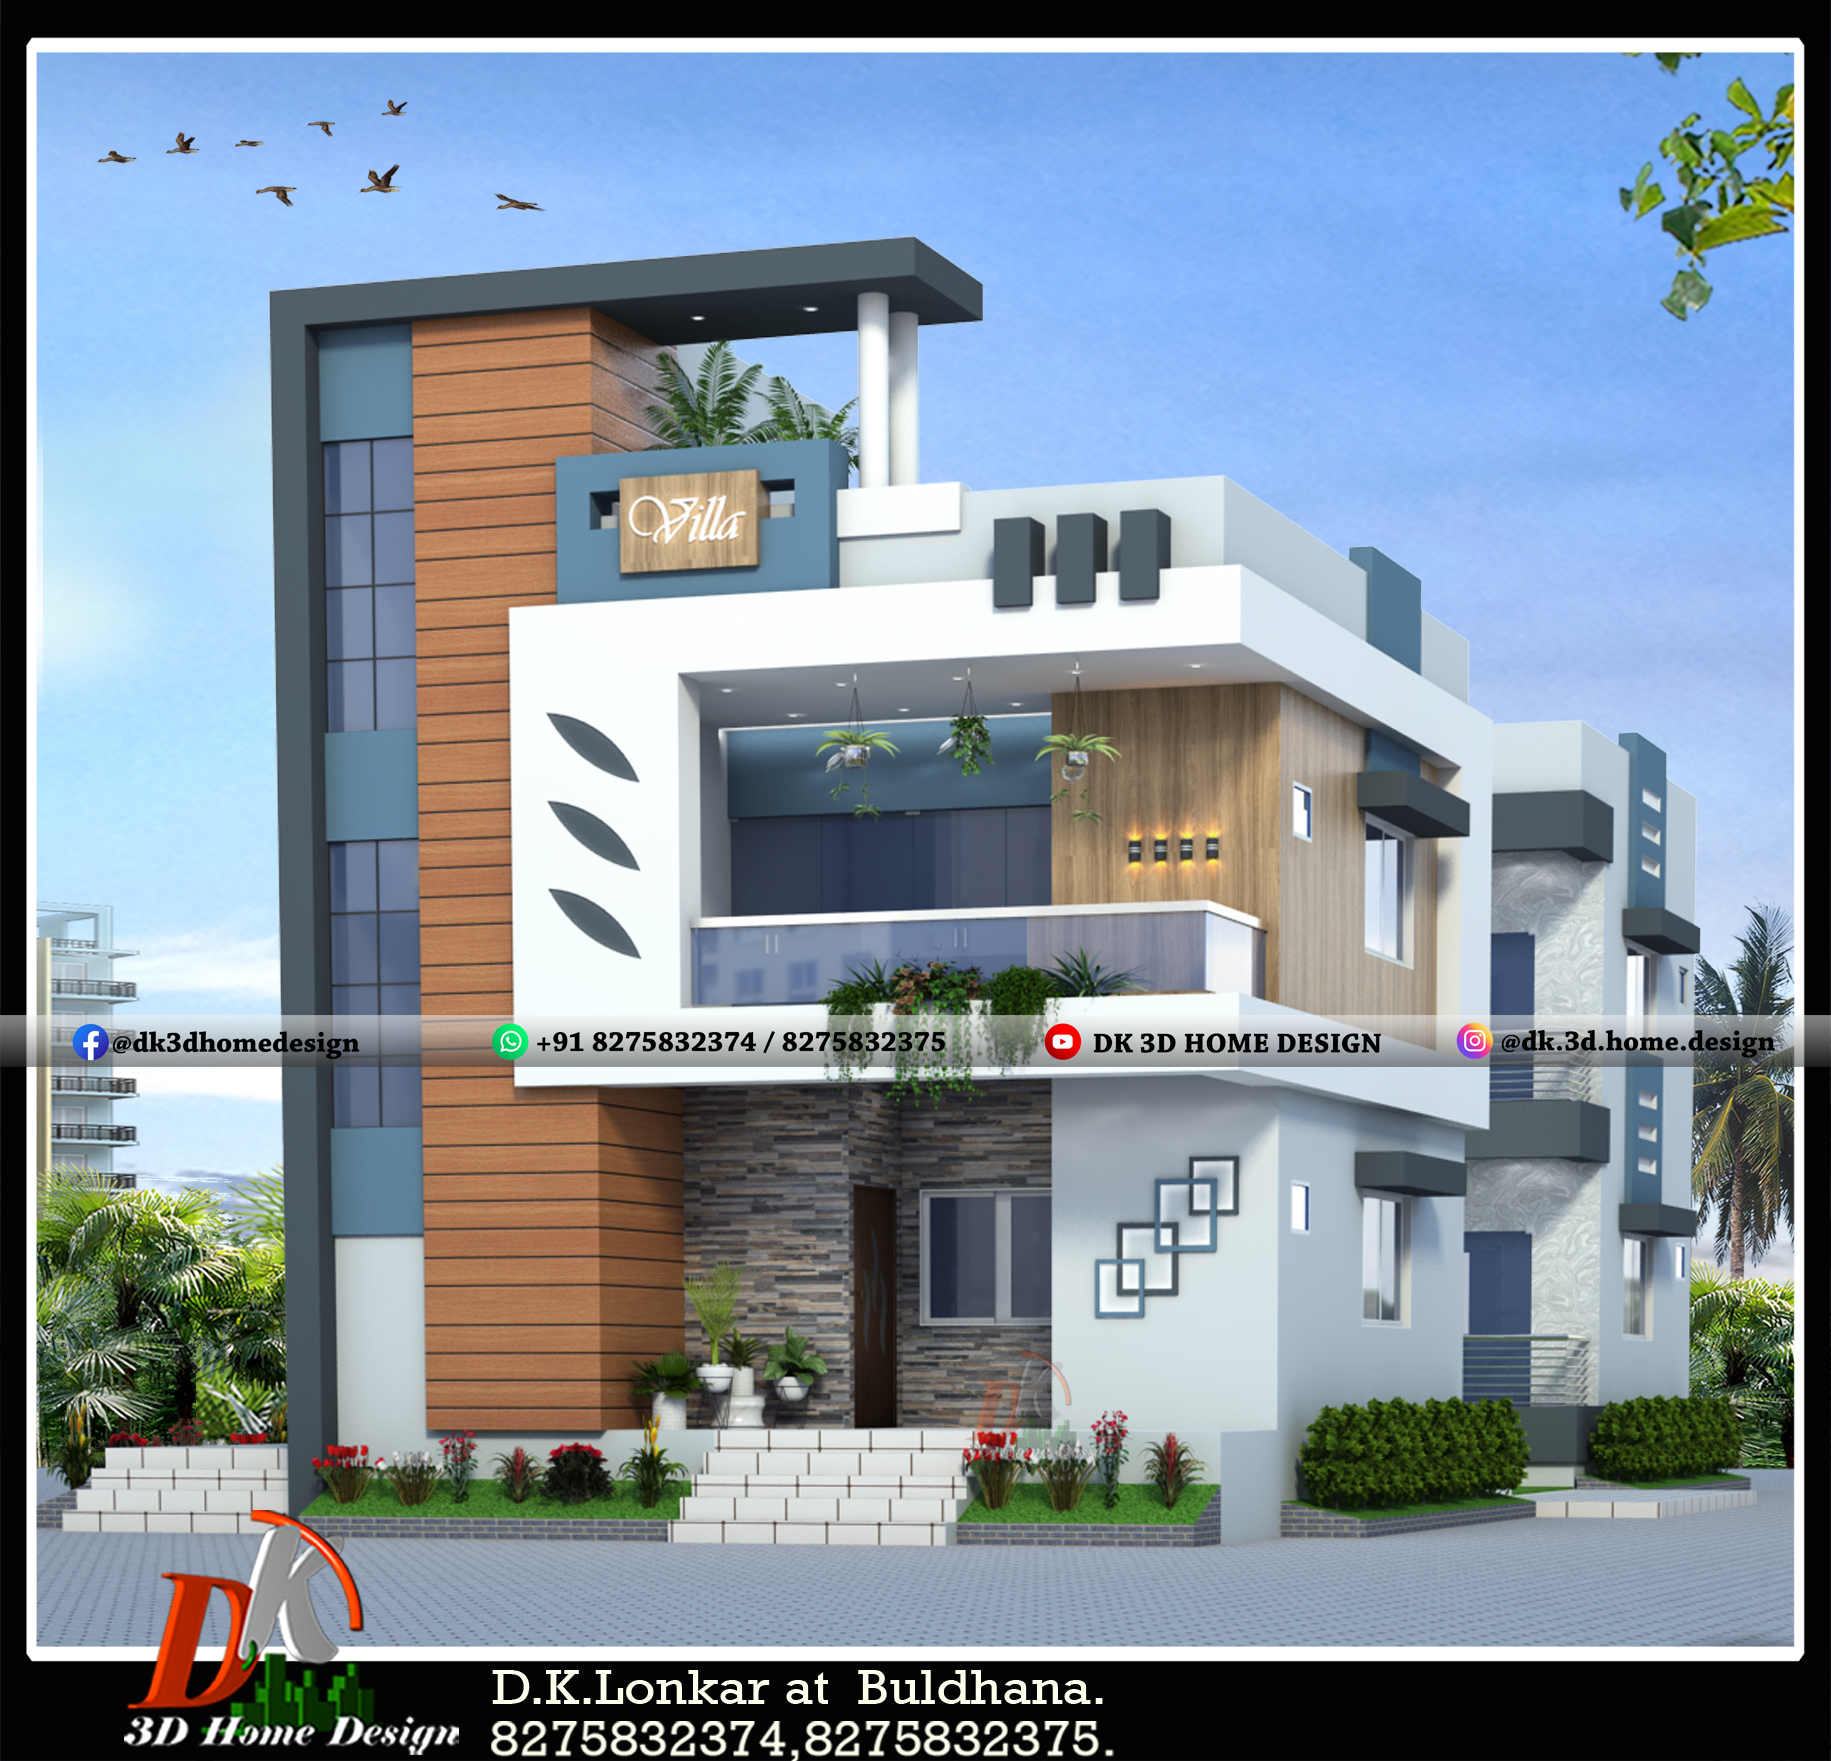 Small modern bungalow house design